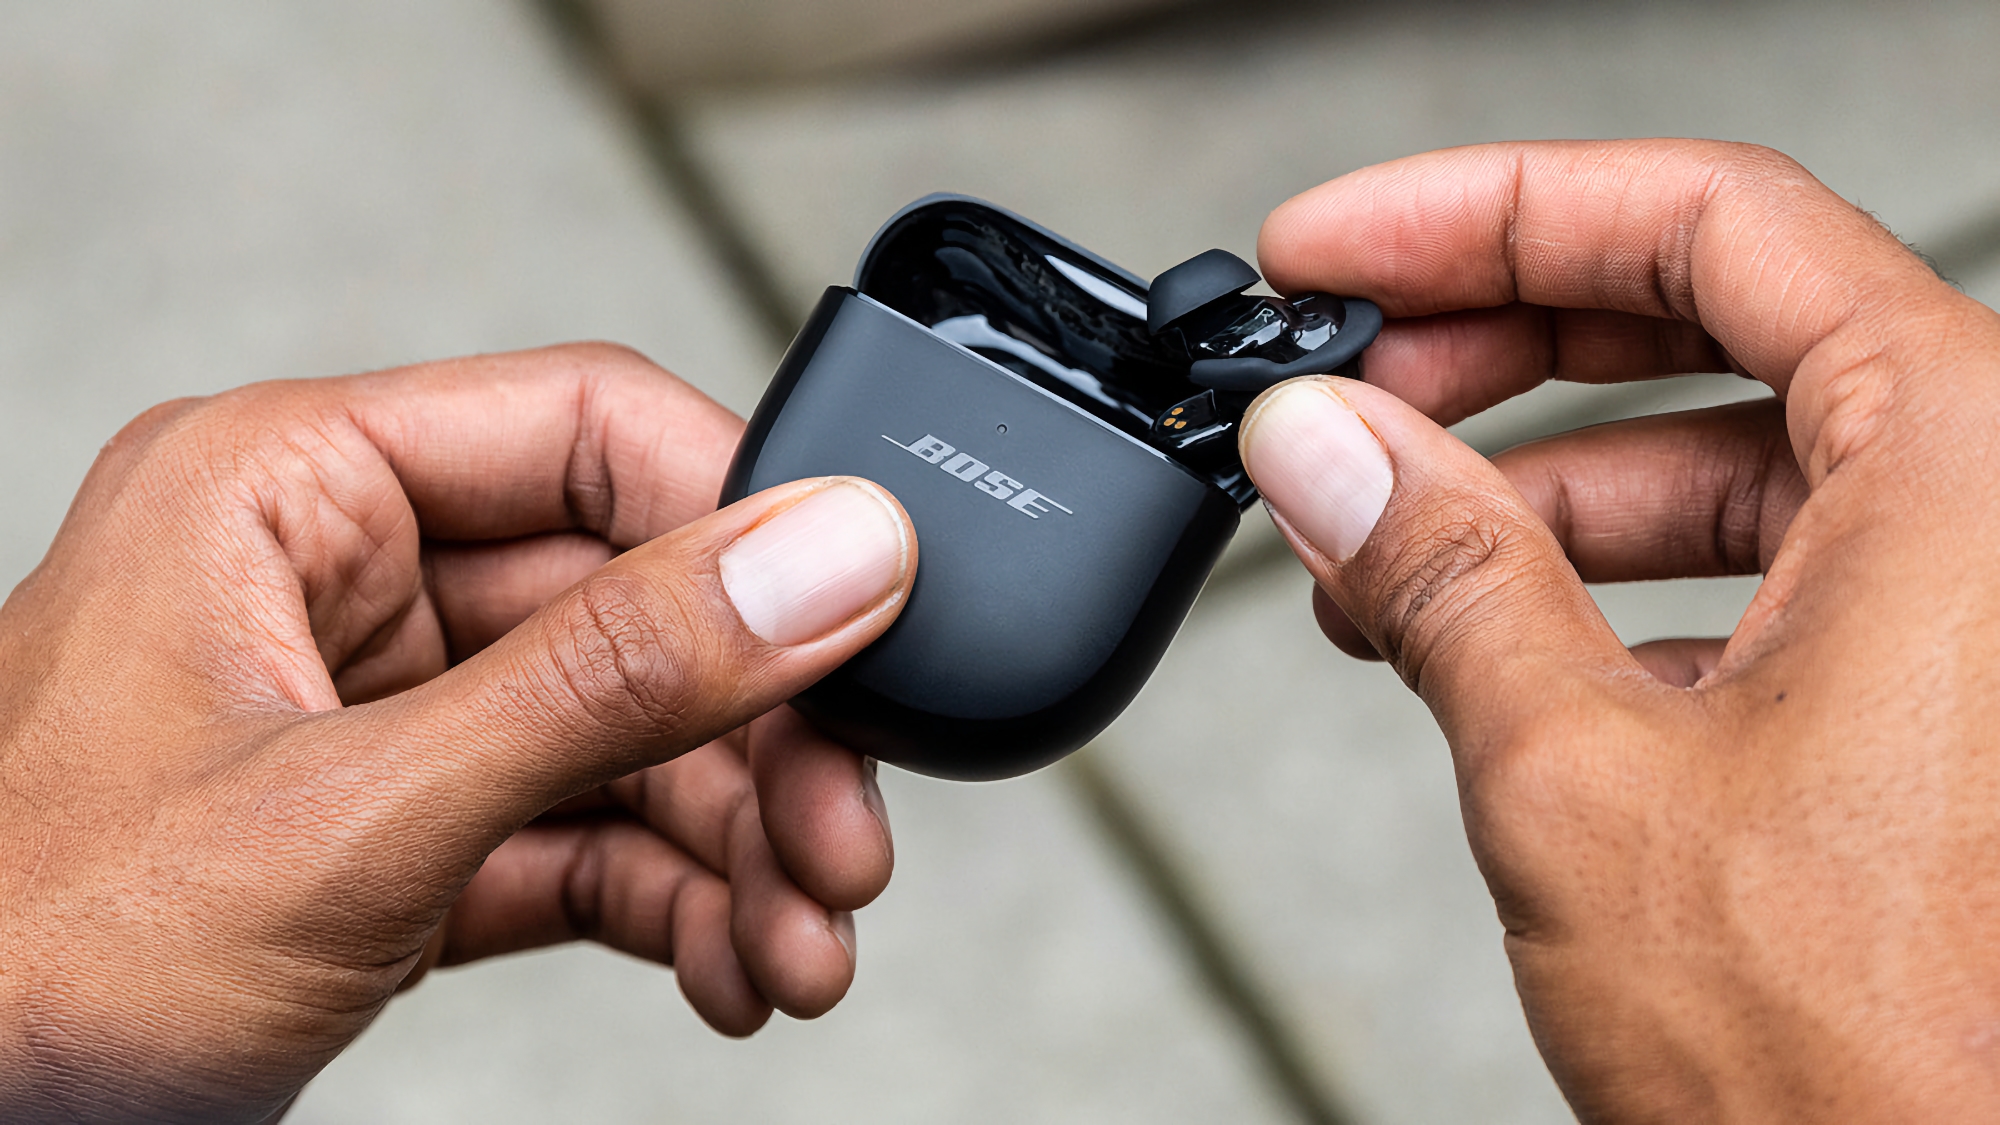 Bose QuietComfort Earbuds II are available on Amazon at a discounted price of $80